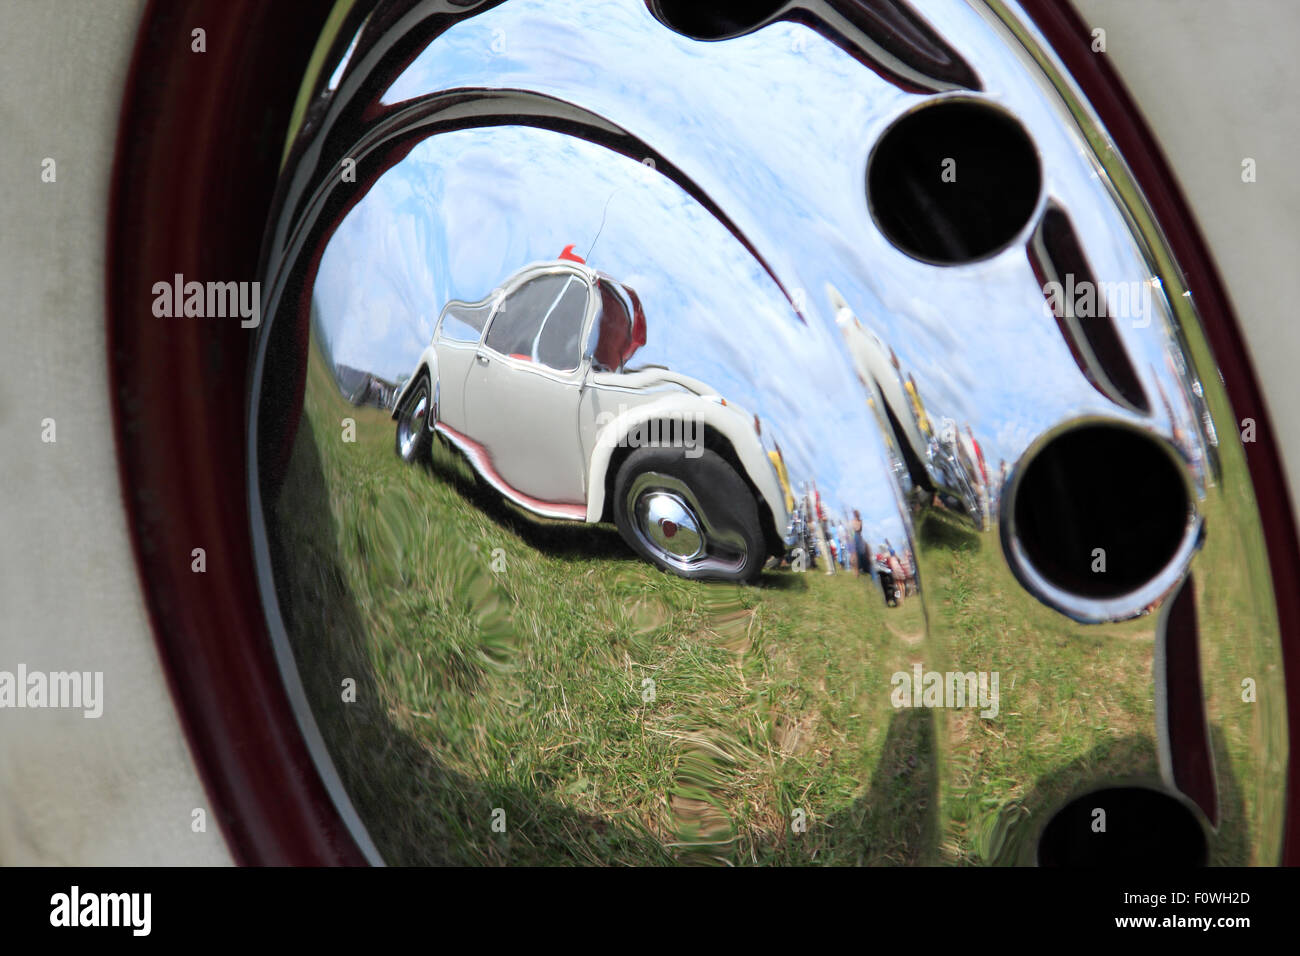 Vintage car reflected in a chrome hubcap. Stock Photo